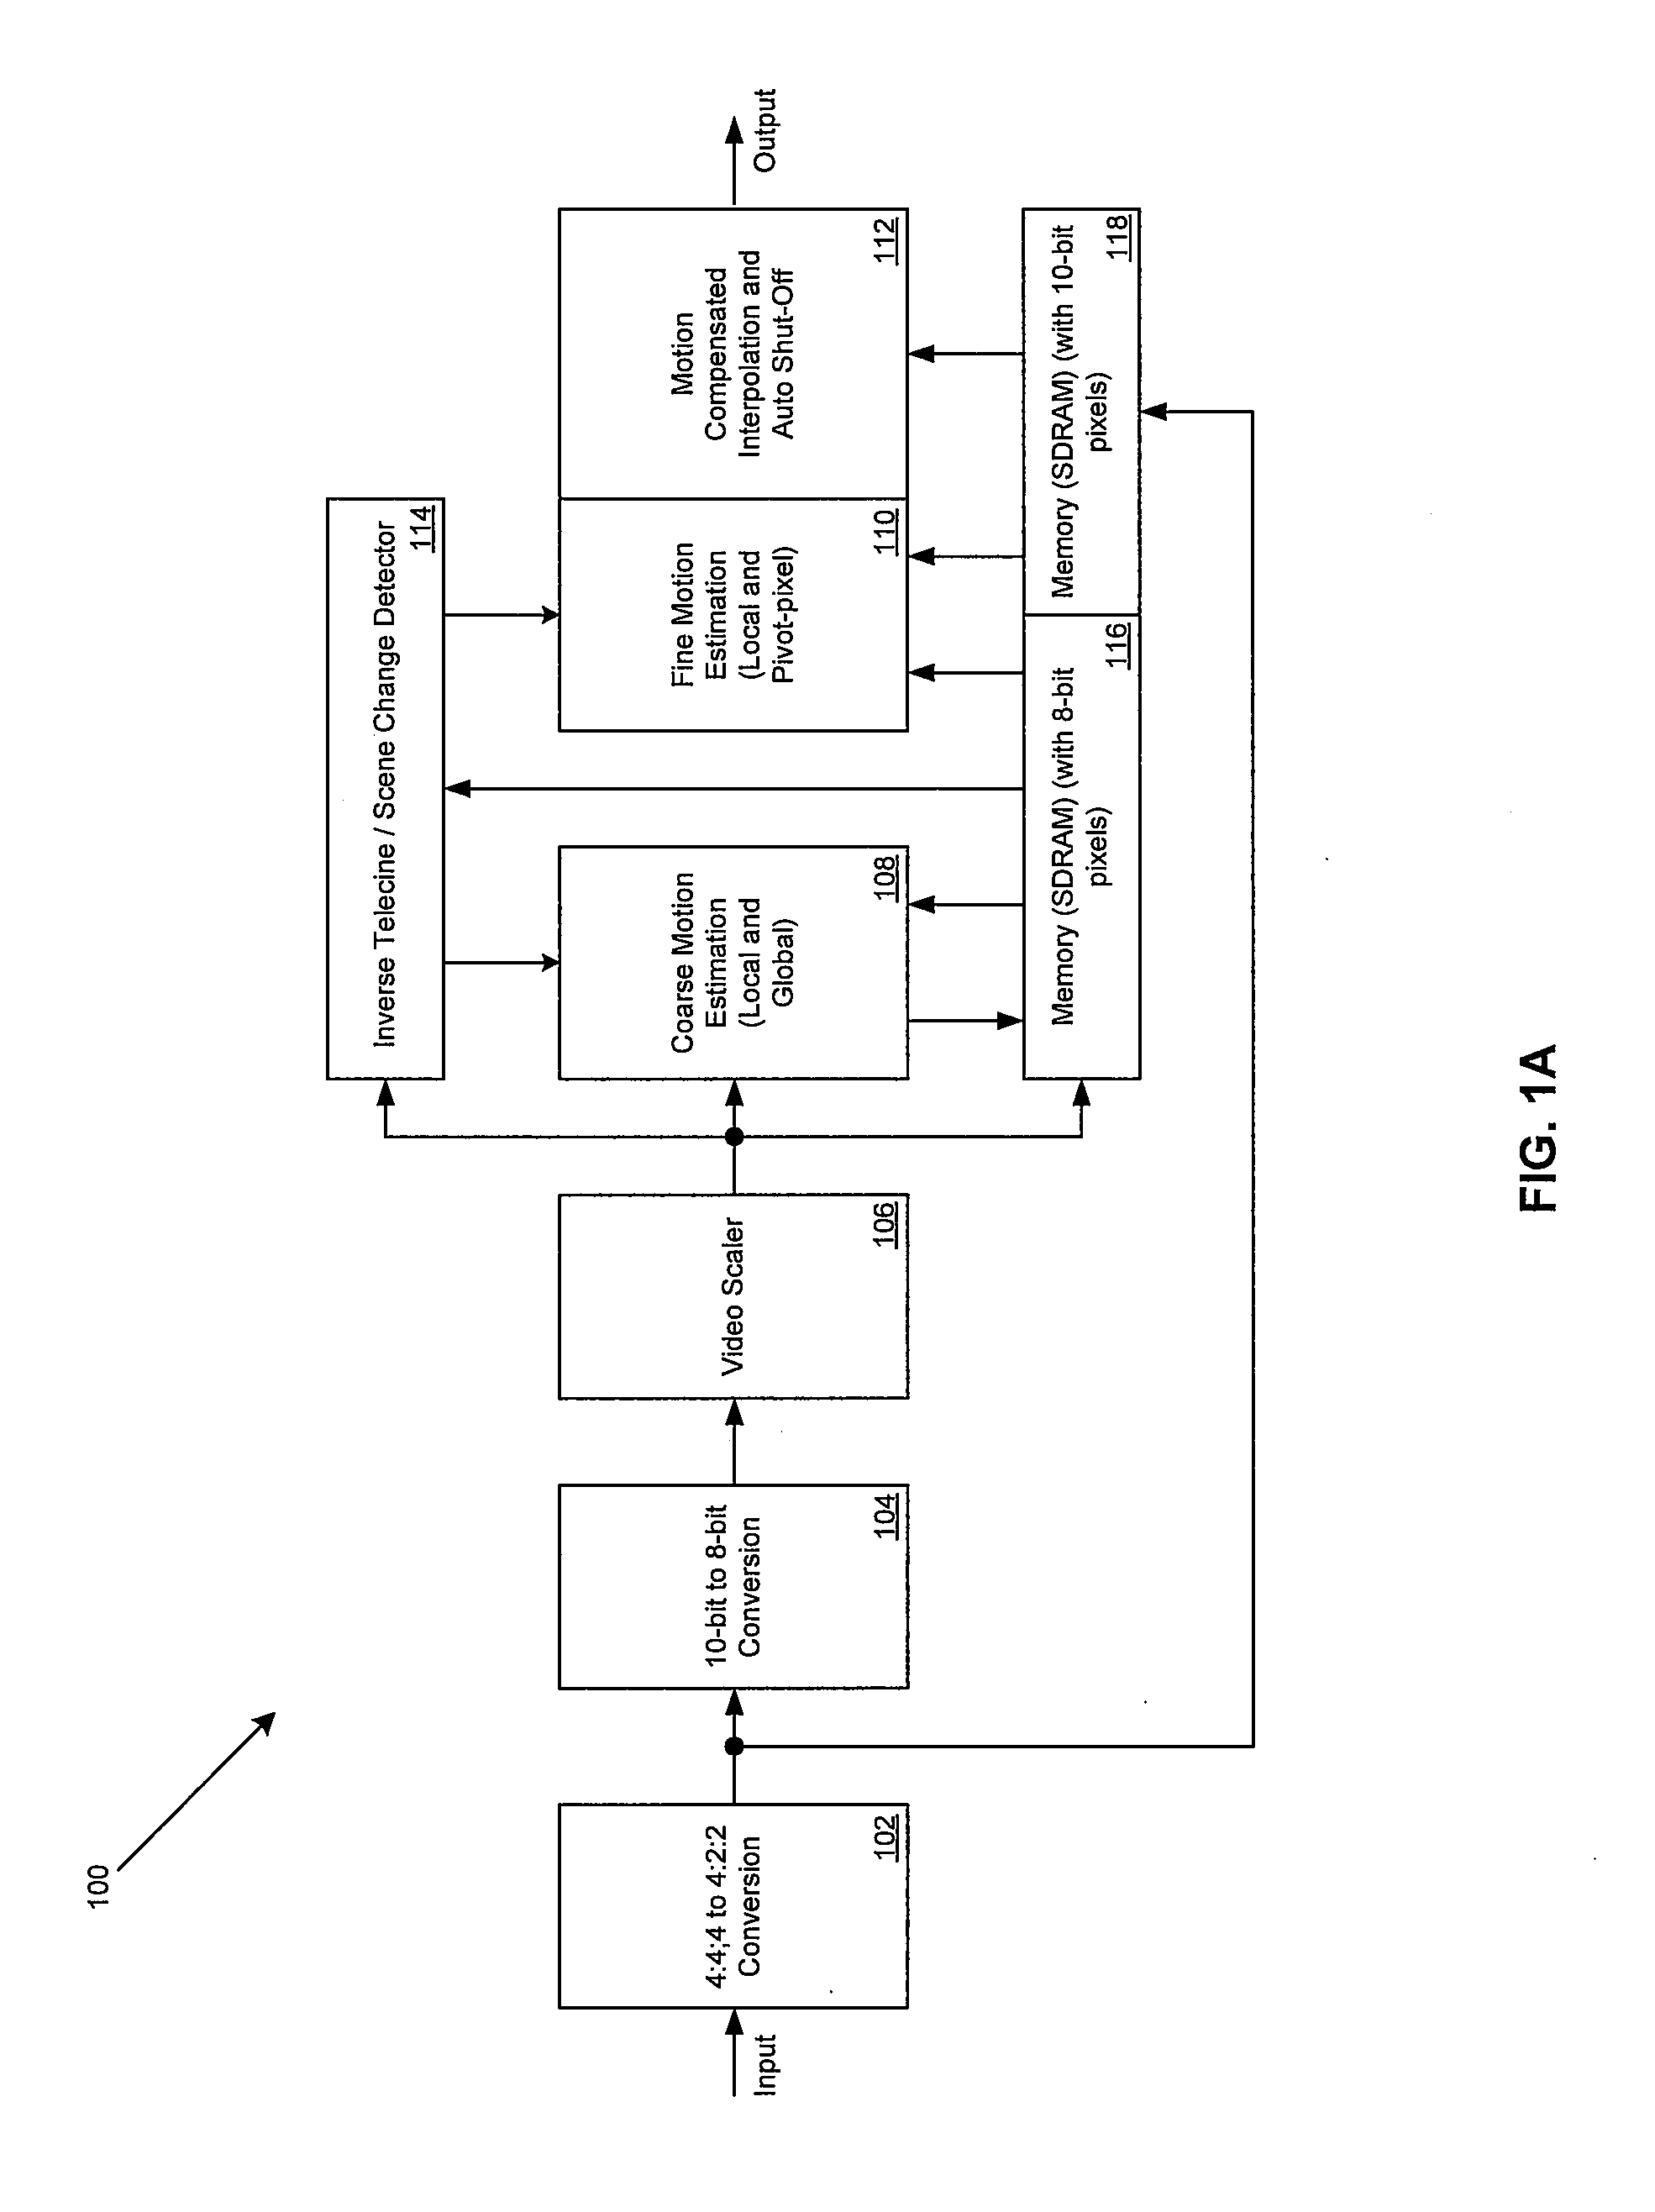 Method and System for Inverse Telecine and Scene Change Detection of Progressive Video